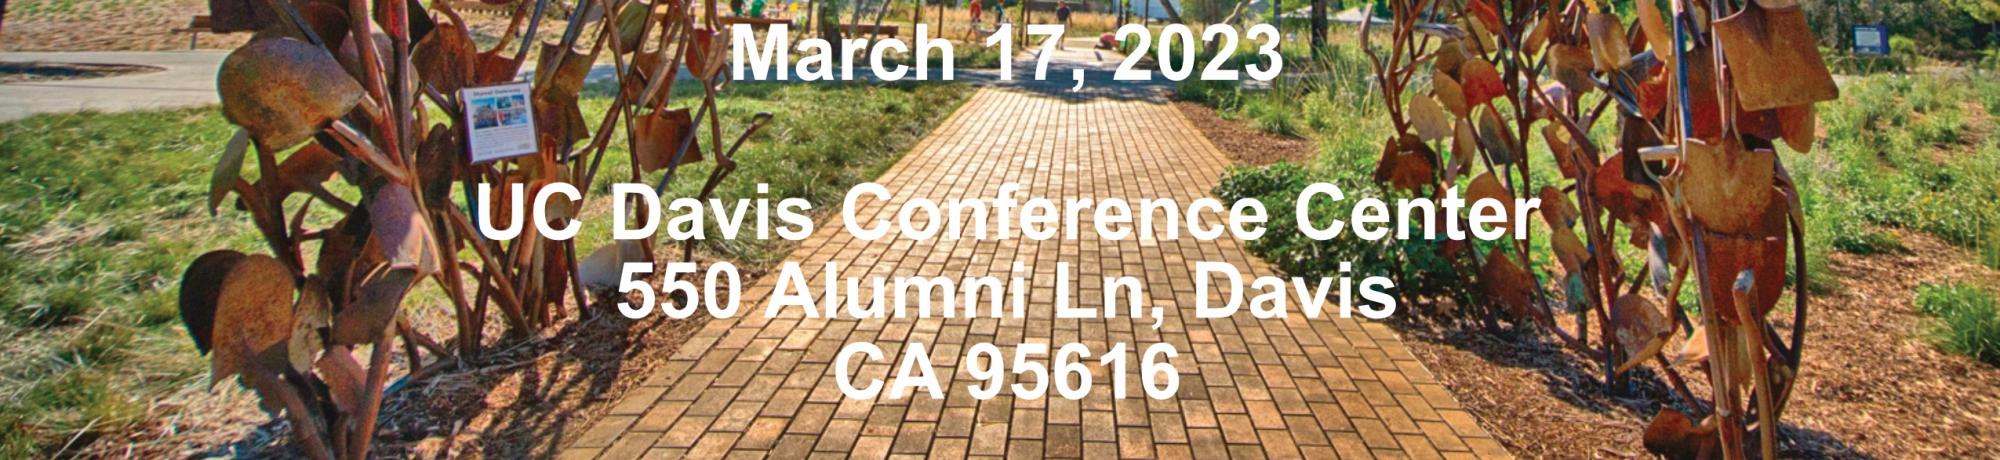 The PSA invites you to submit an abstract to the UC Davis Postdoctoral Research Symposium 2023!